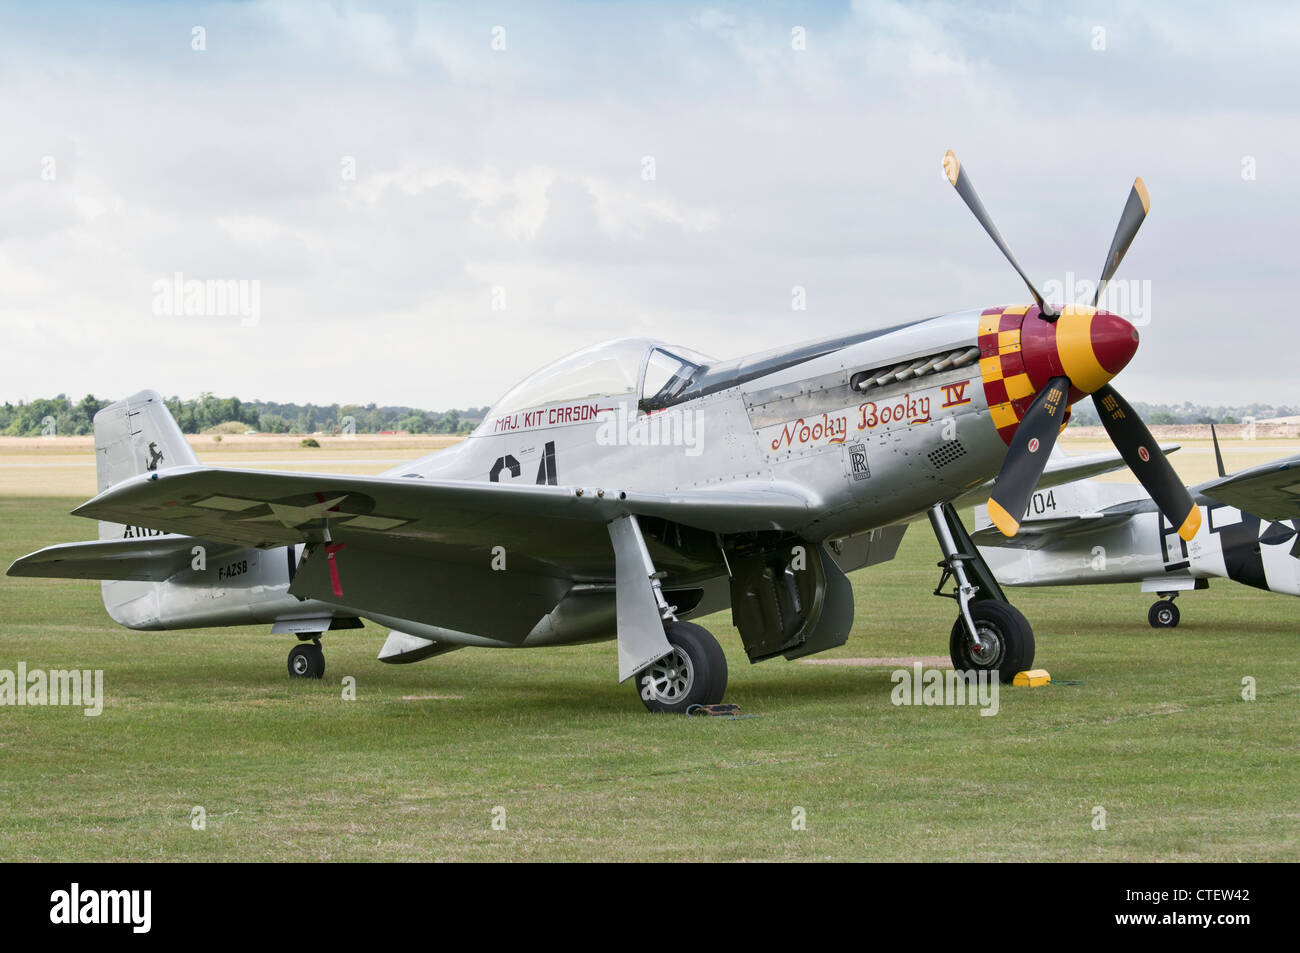 P Mustang 'Nooky Booky IV' al Flying Legends 2011 Airshow, Imperial War Museum Duxford Foto Stock